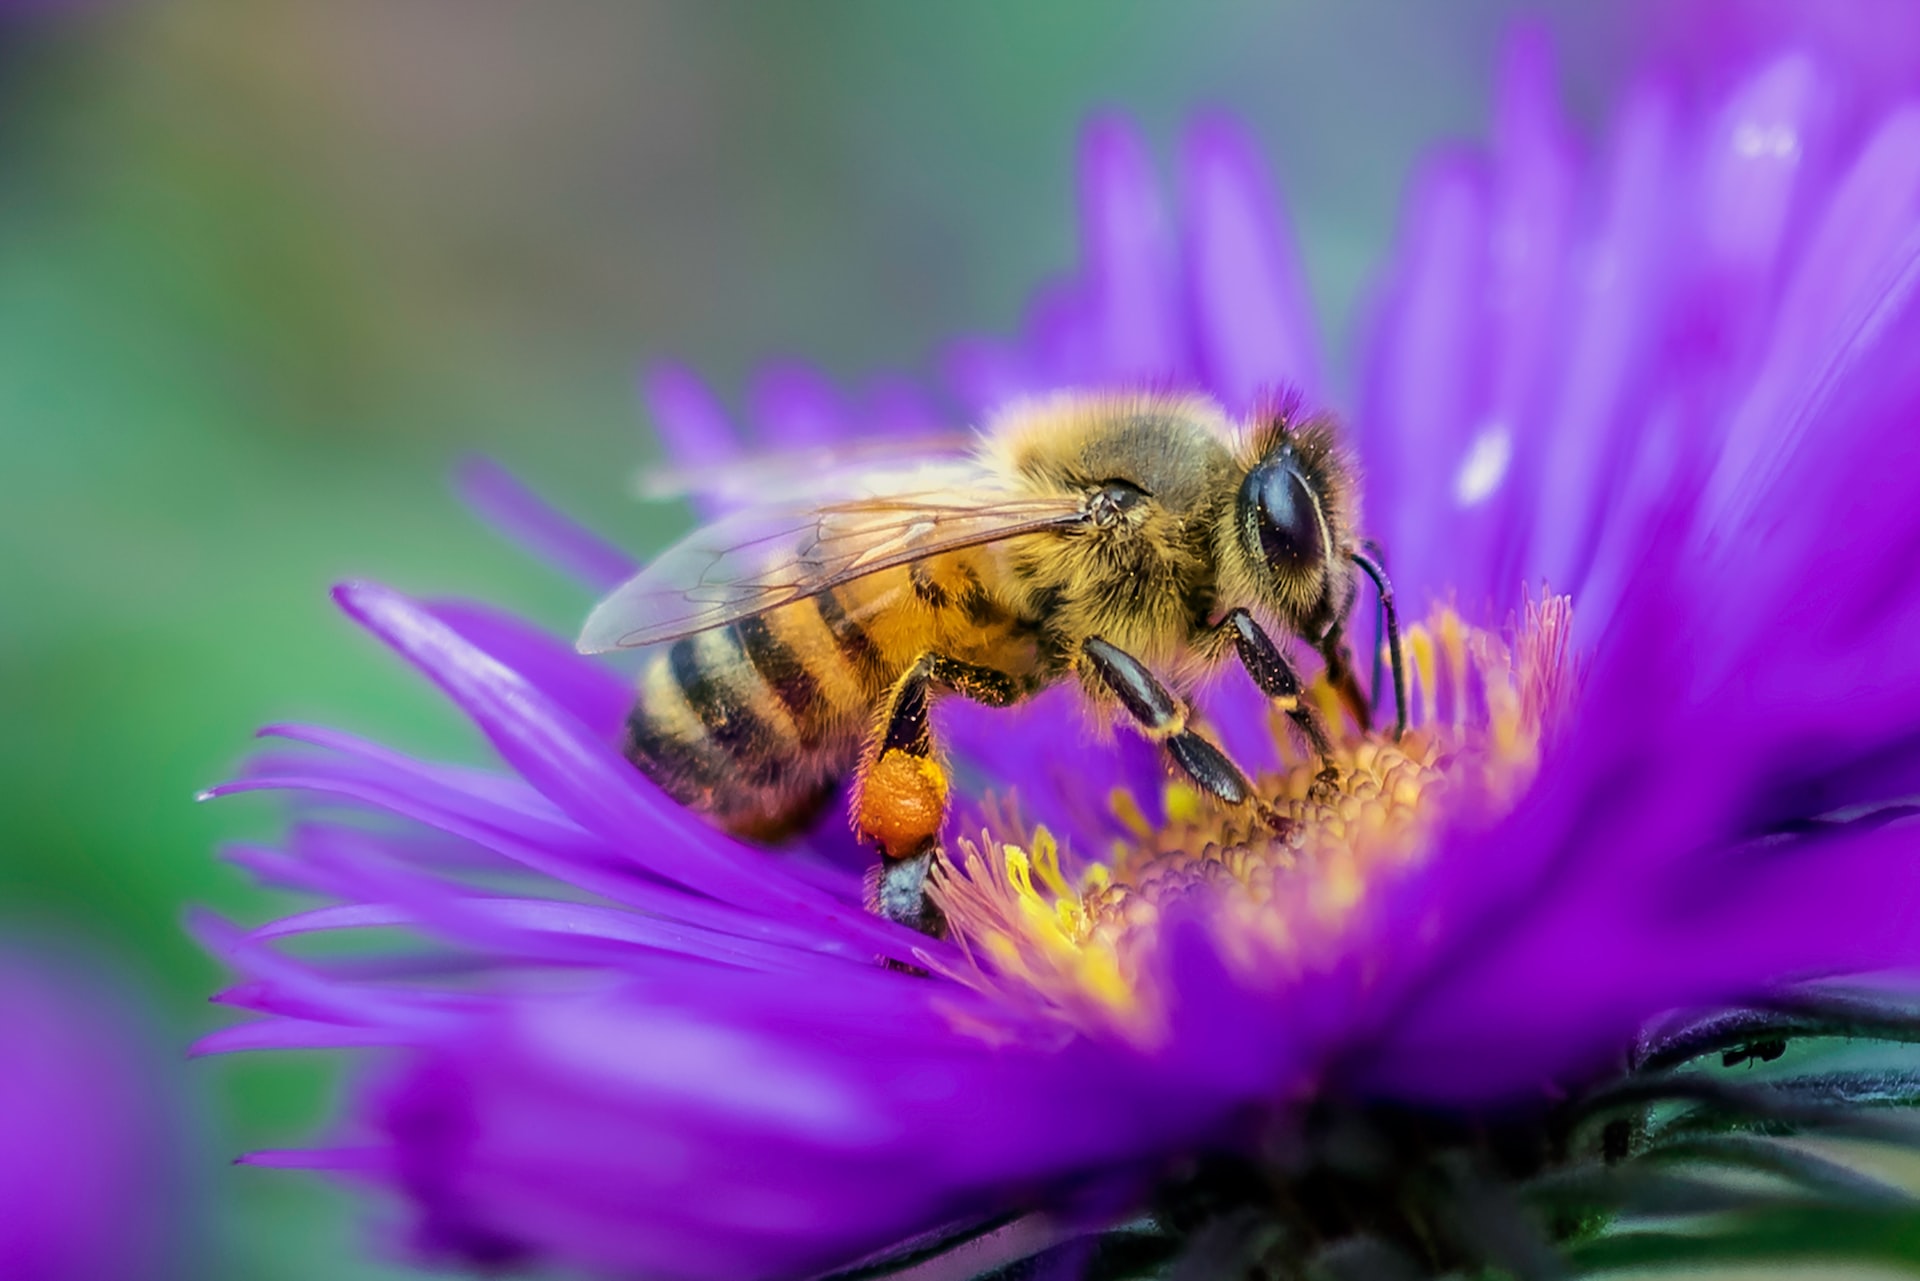 Top 20 Interesting Facts About the Amazing World of Honey Bees